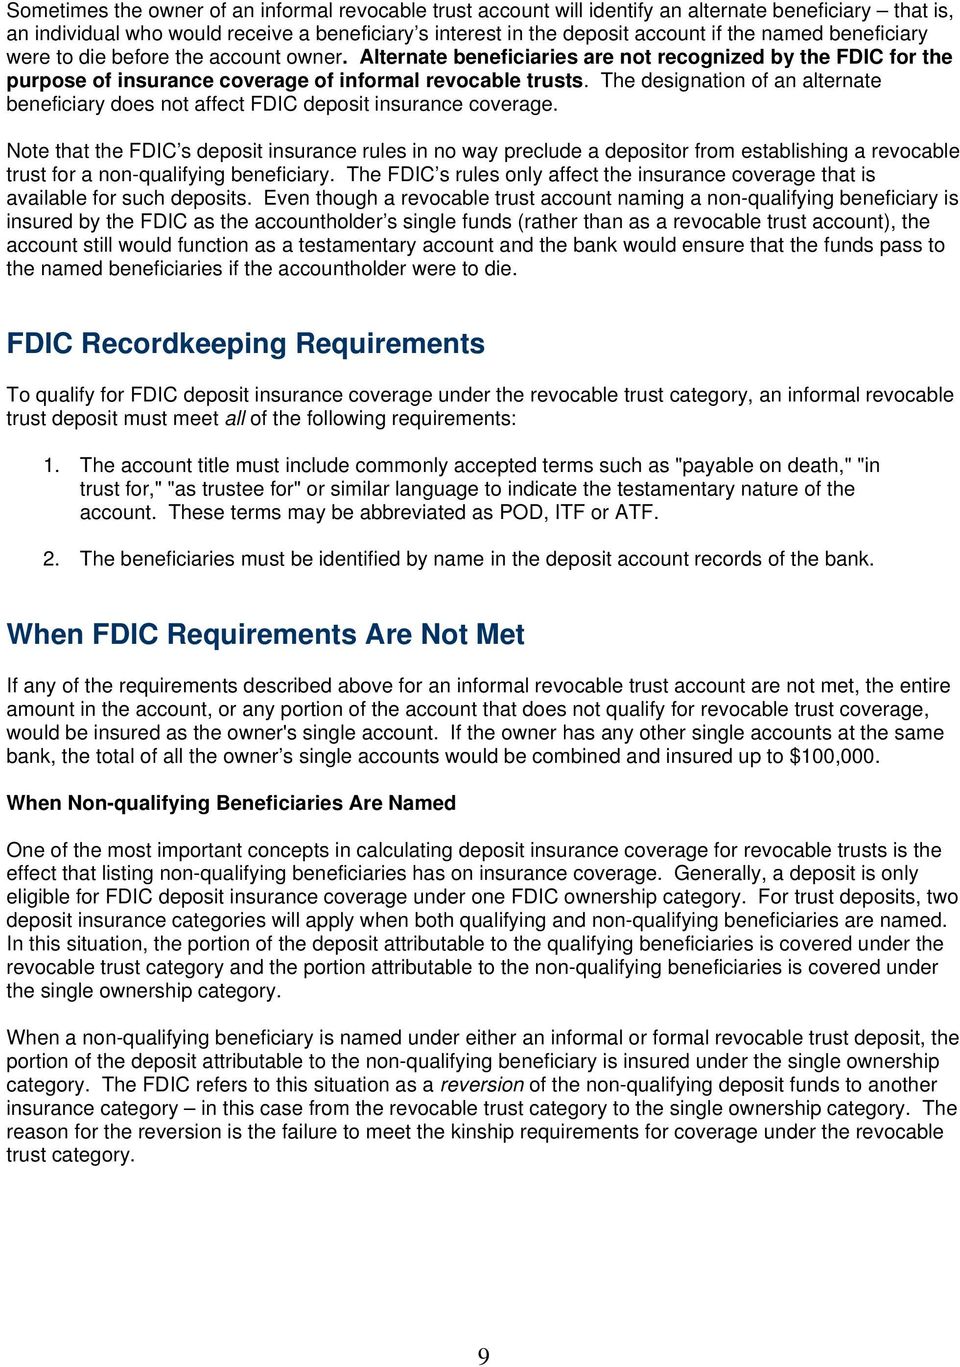 Table Of Contents Chapter 1 Introduction To Fdic Deposit